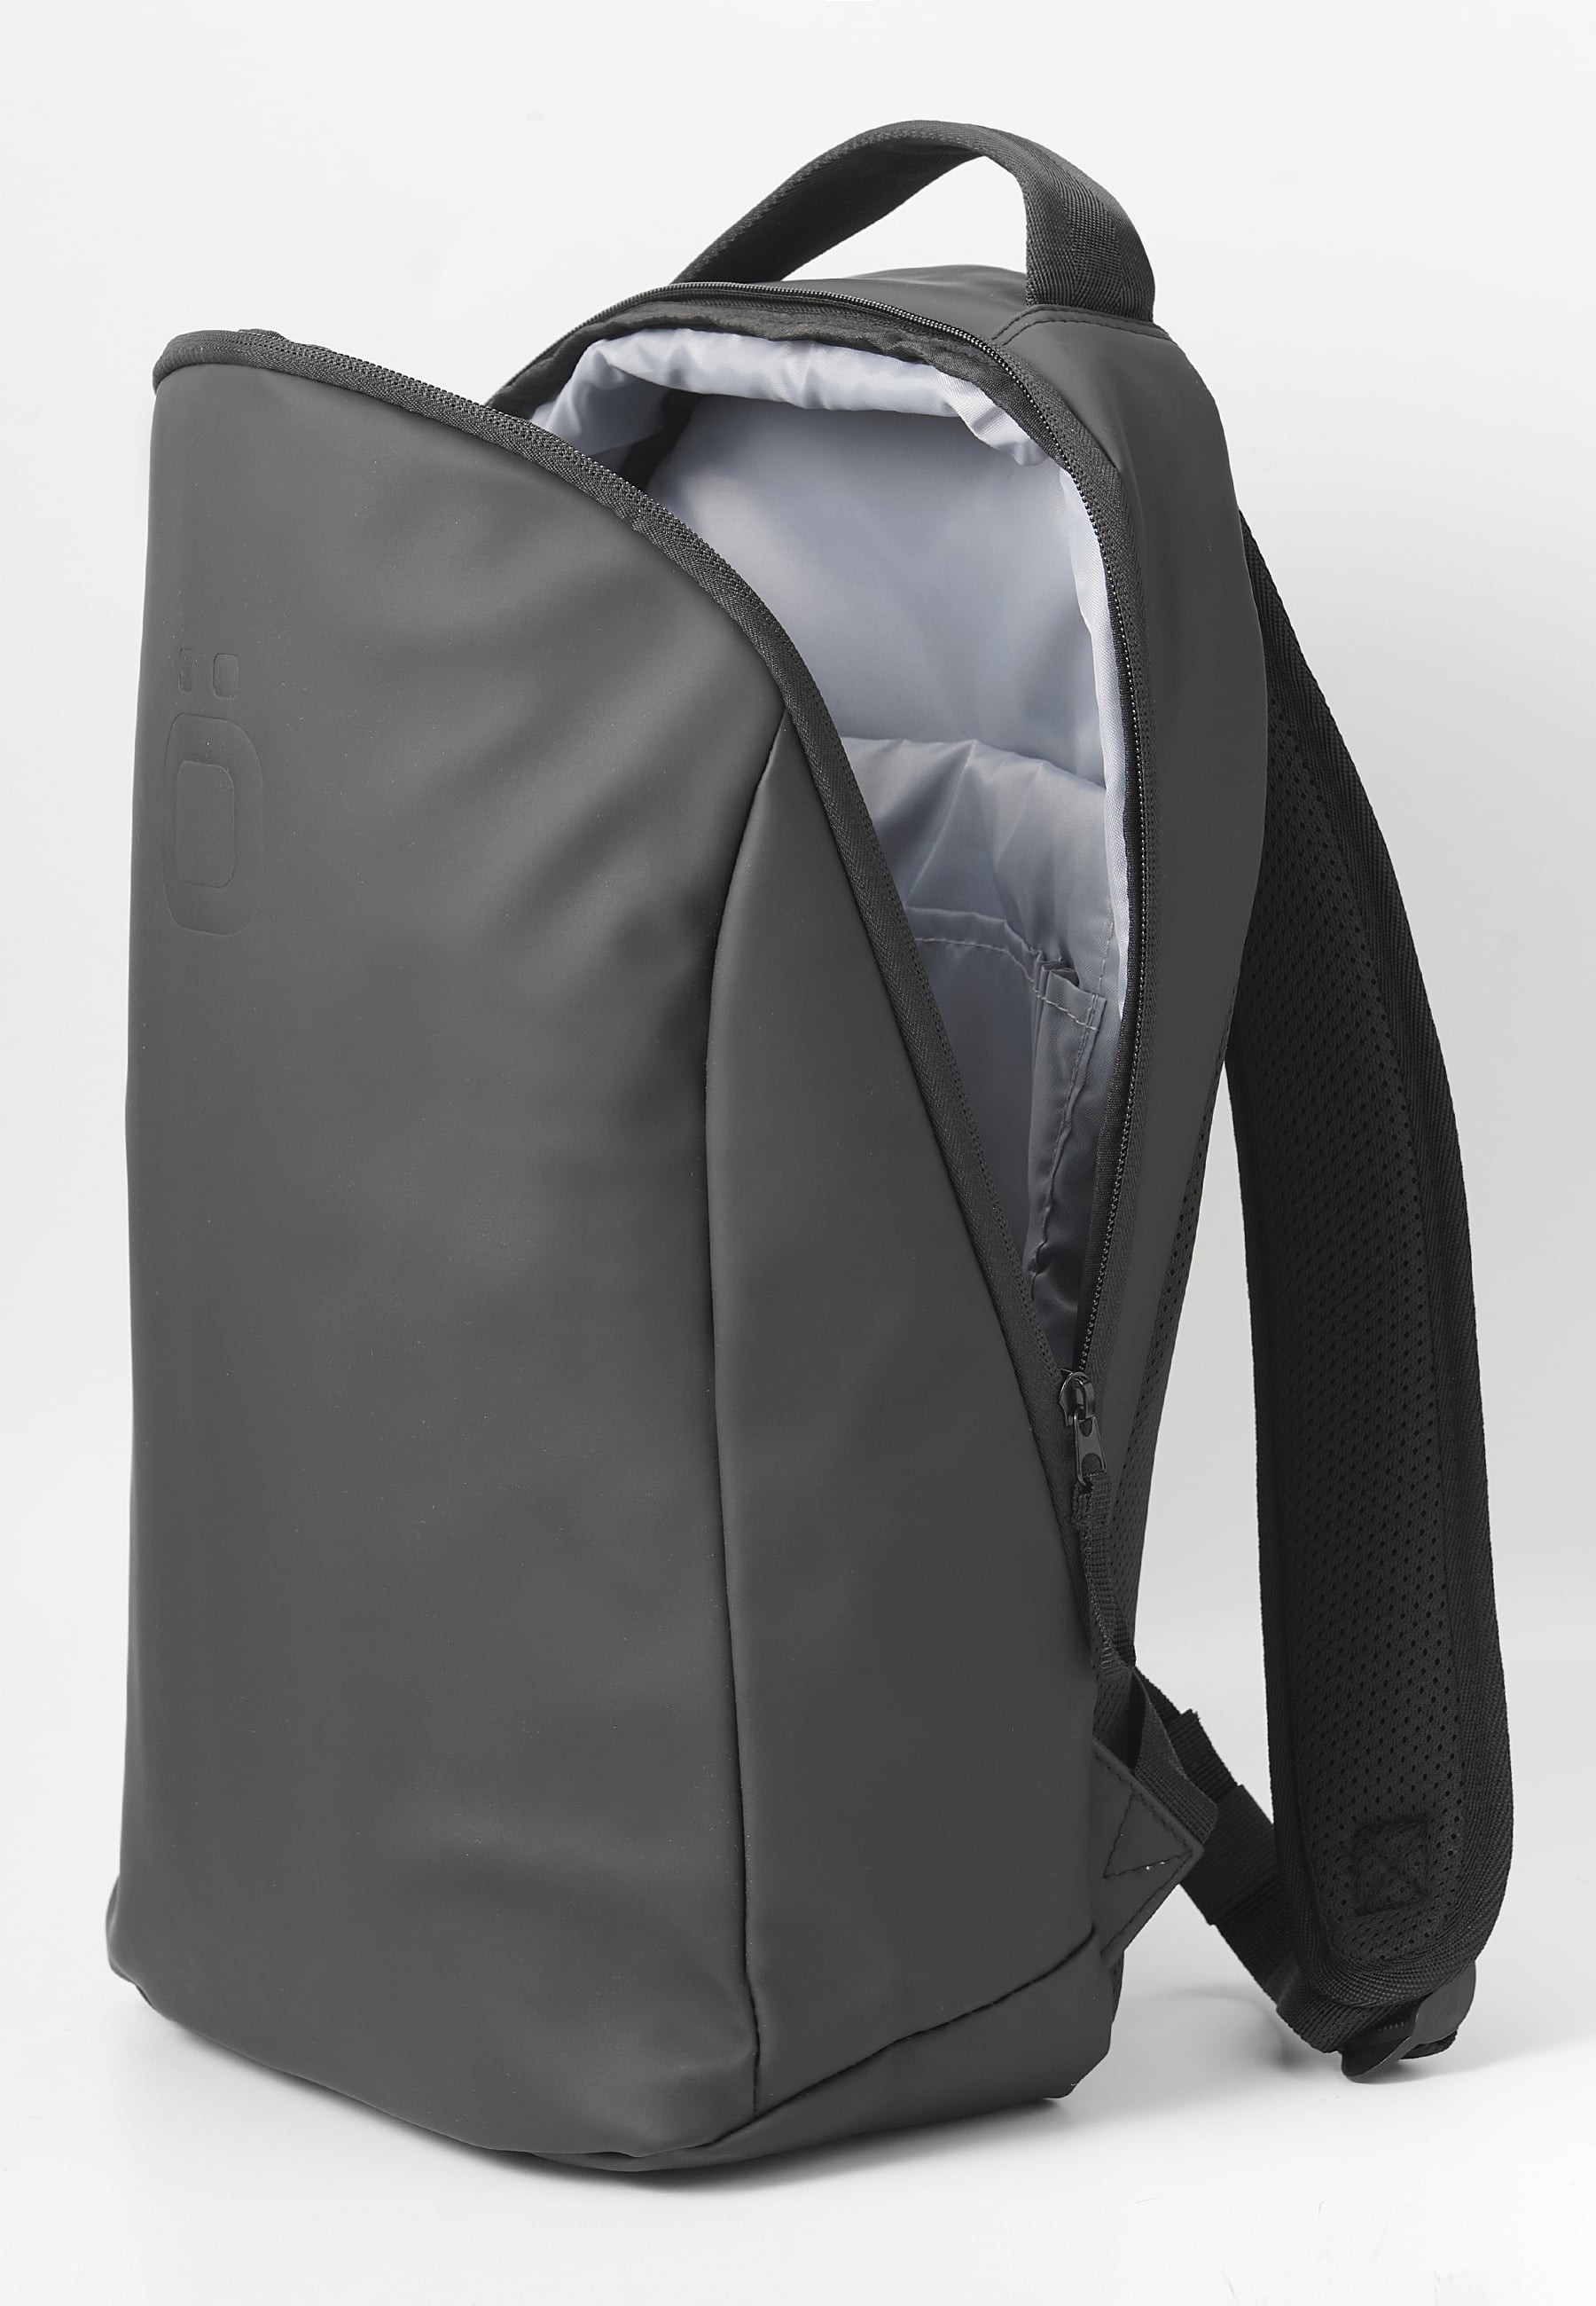 Koröshi Backpack with zipper closure and interior laptop pocket in Black